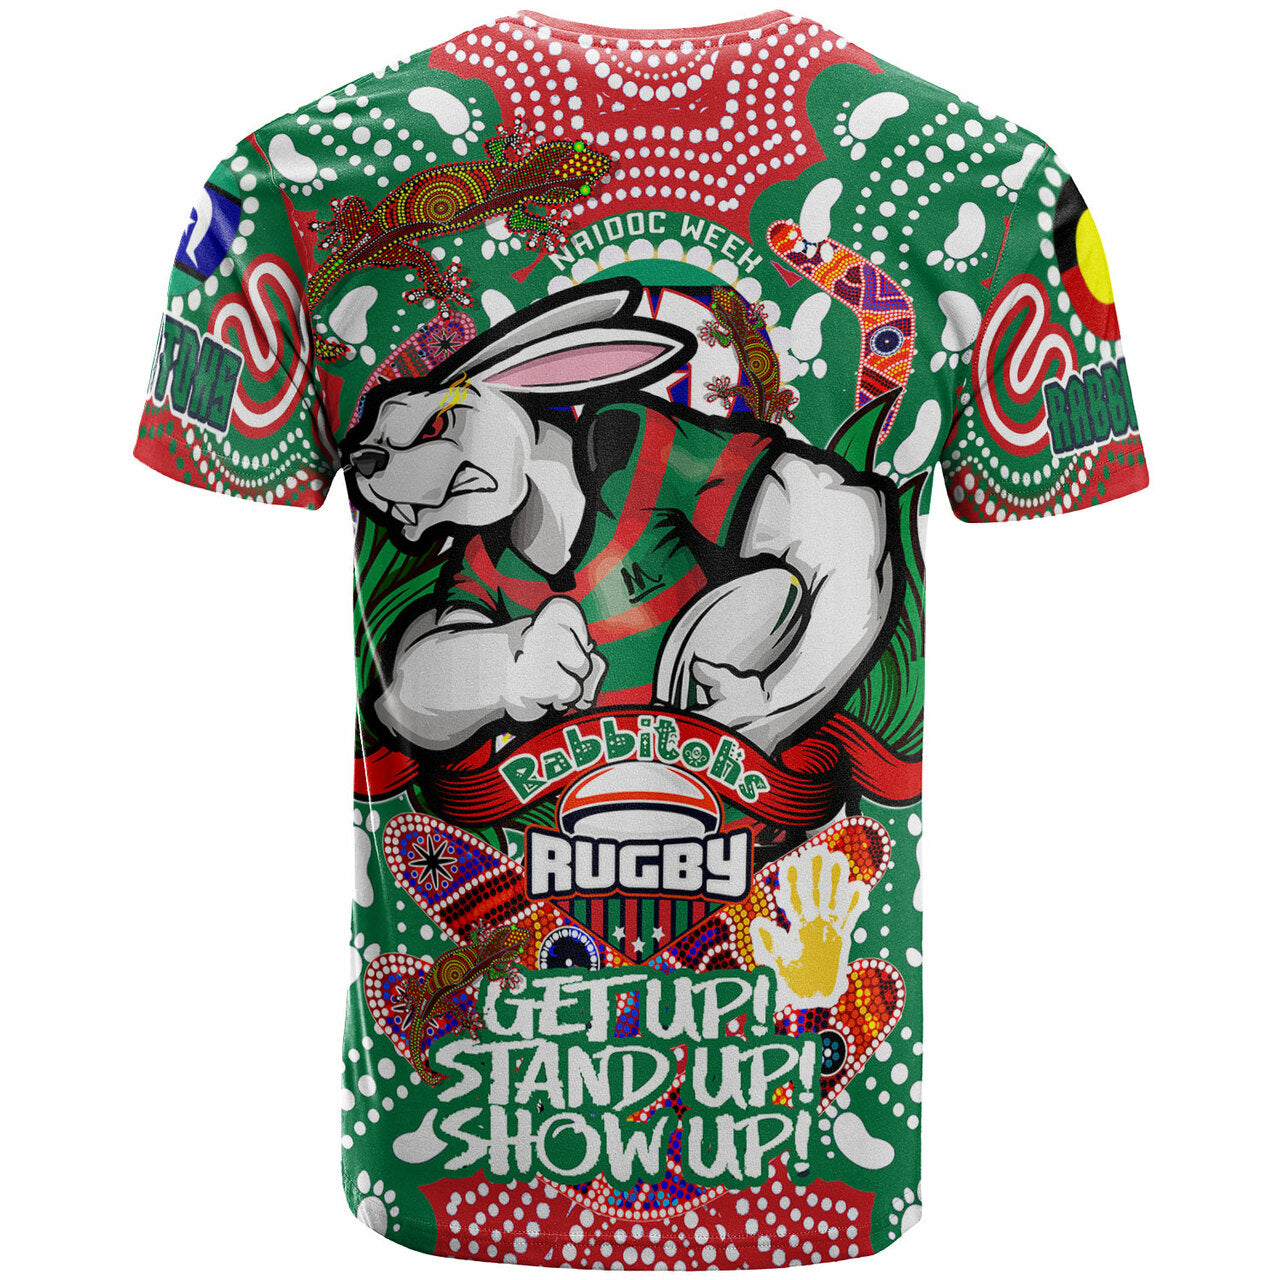 rabbitohs-rugby-naidoc-week-t-shirt-south-sydney-rabbitohs-with-aboriginal-and-torres-strait-islander-culture-rlt12